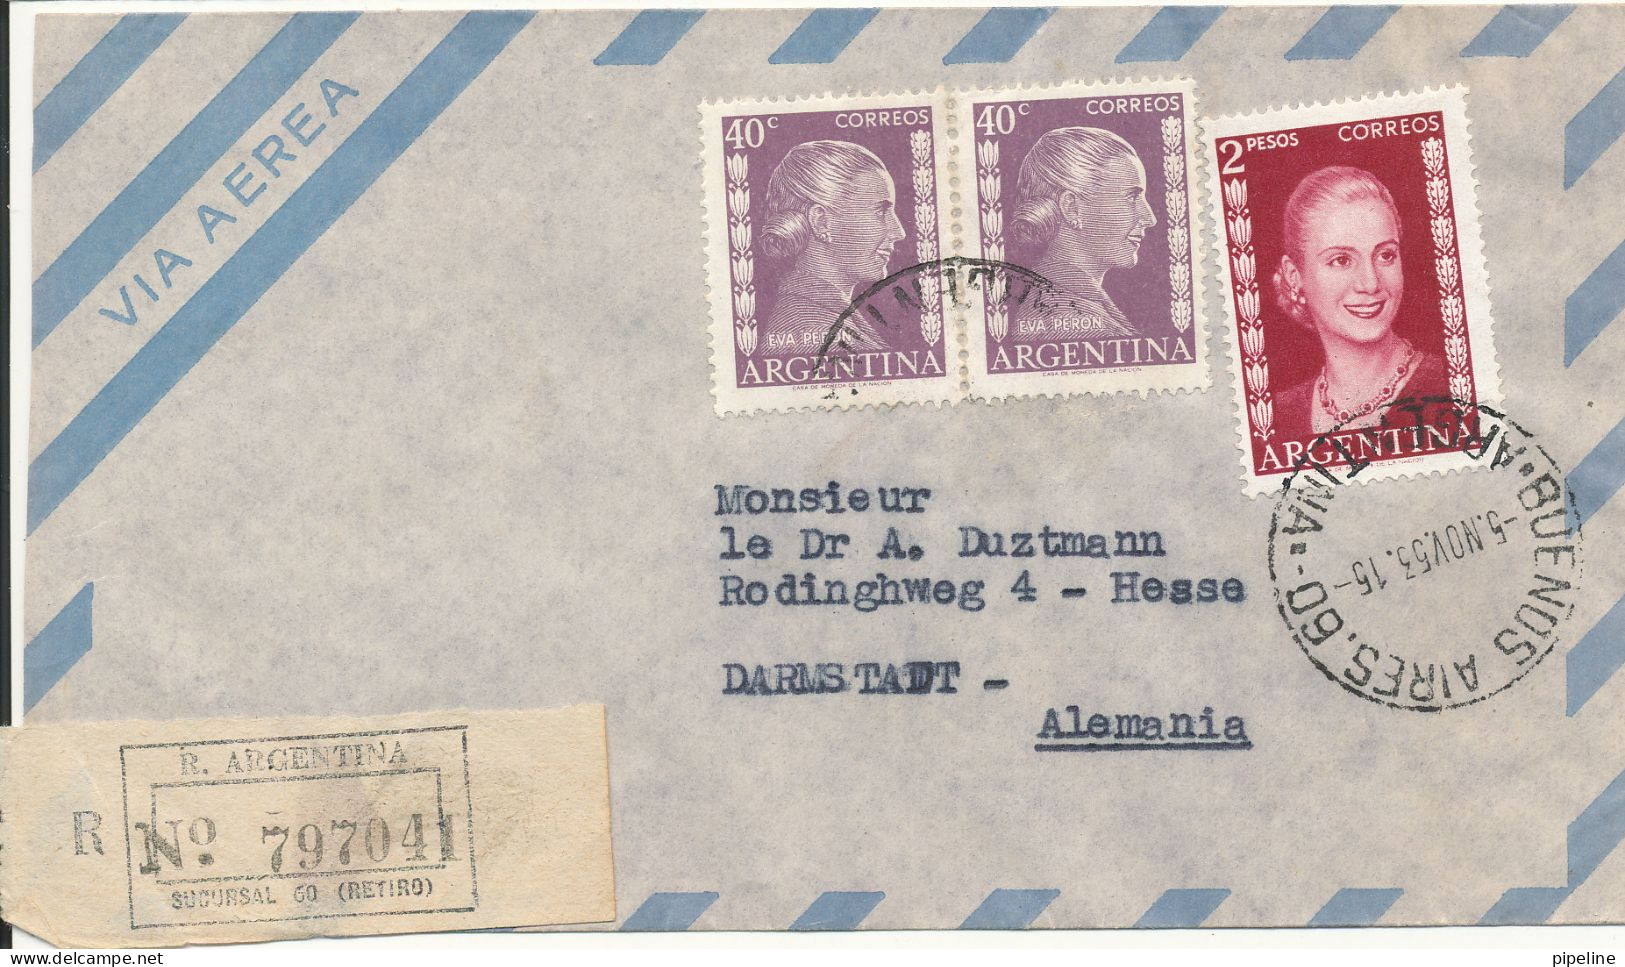 Argentina Registered Air Mail Cover Sent To Germany 5-11-1953 - Covers & Documents